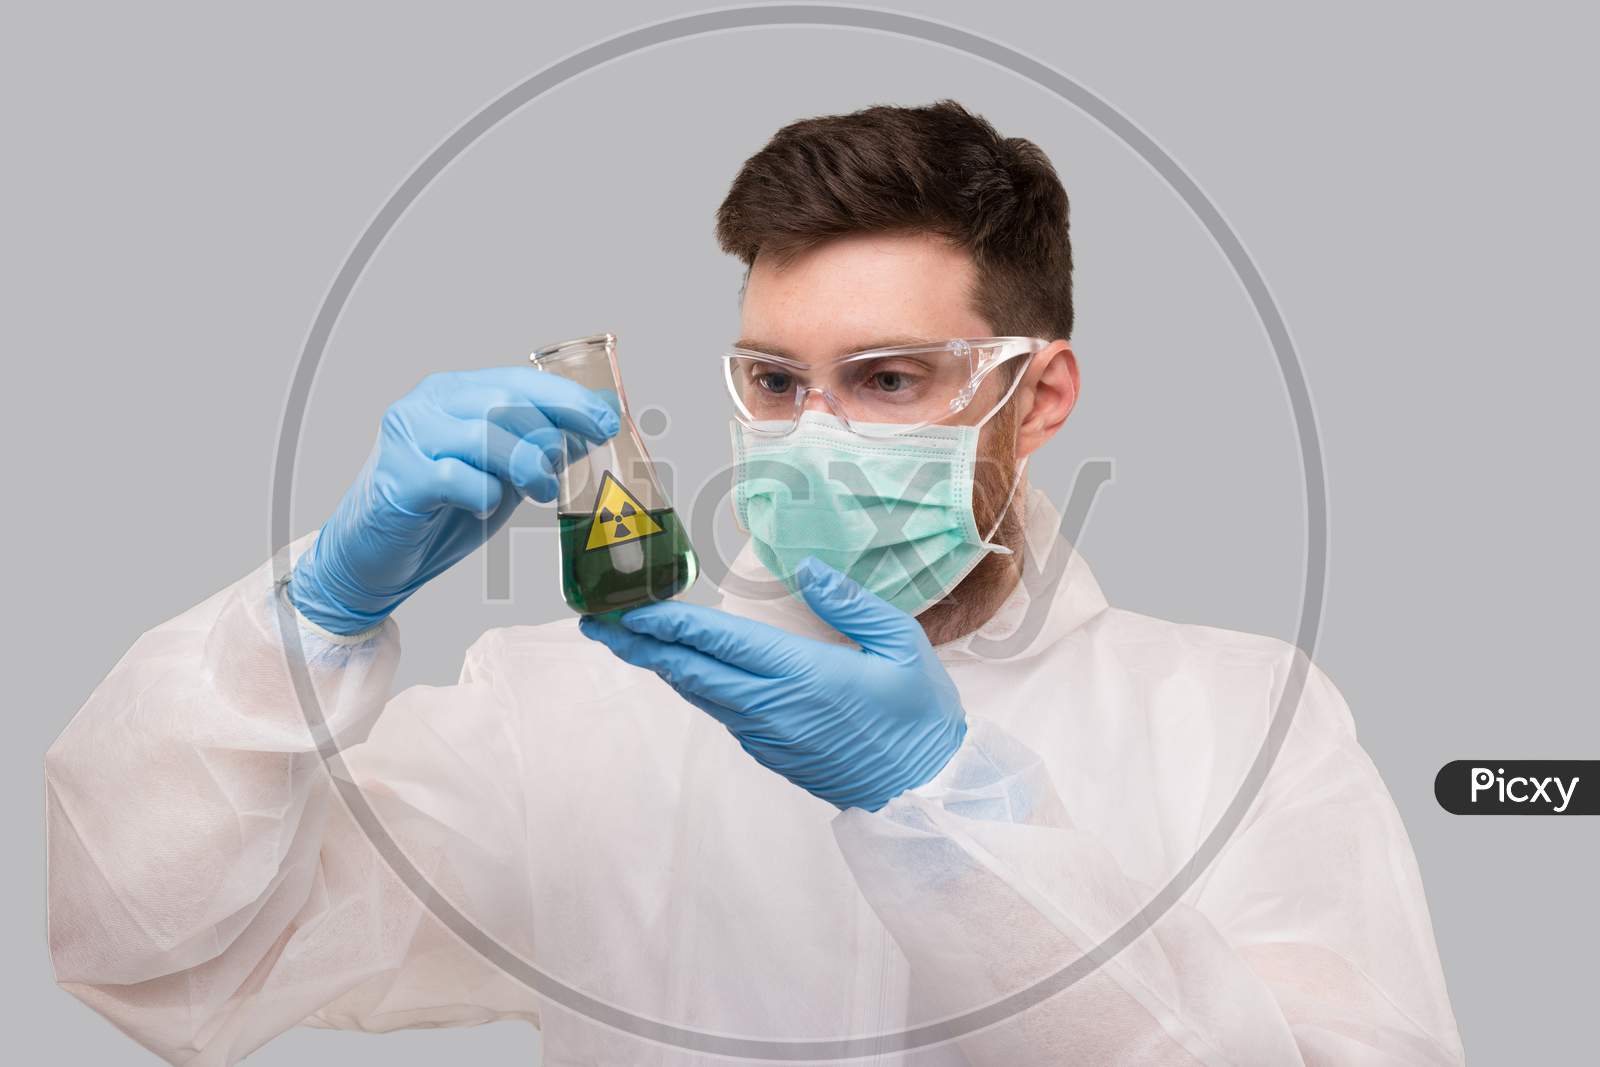 Male Laboratory Worker In Chemical Suit, Wearing Medical Mask And Glasses Watching Flask With Green Liquid Biohazard Sign. Science, Medical, Virus Concept